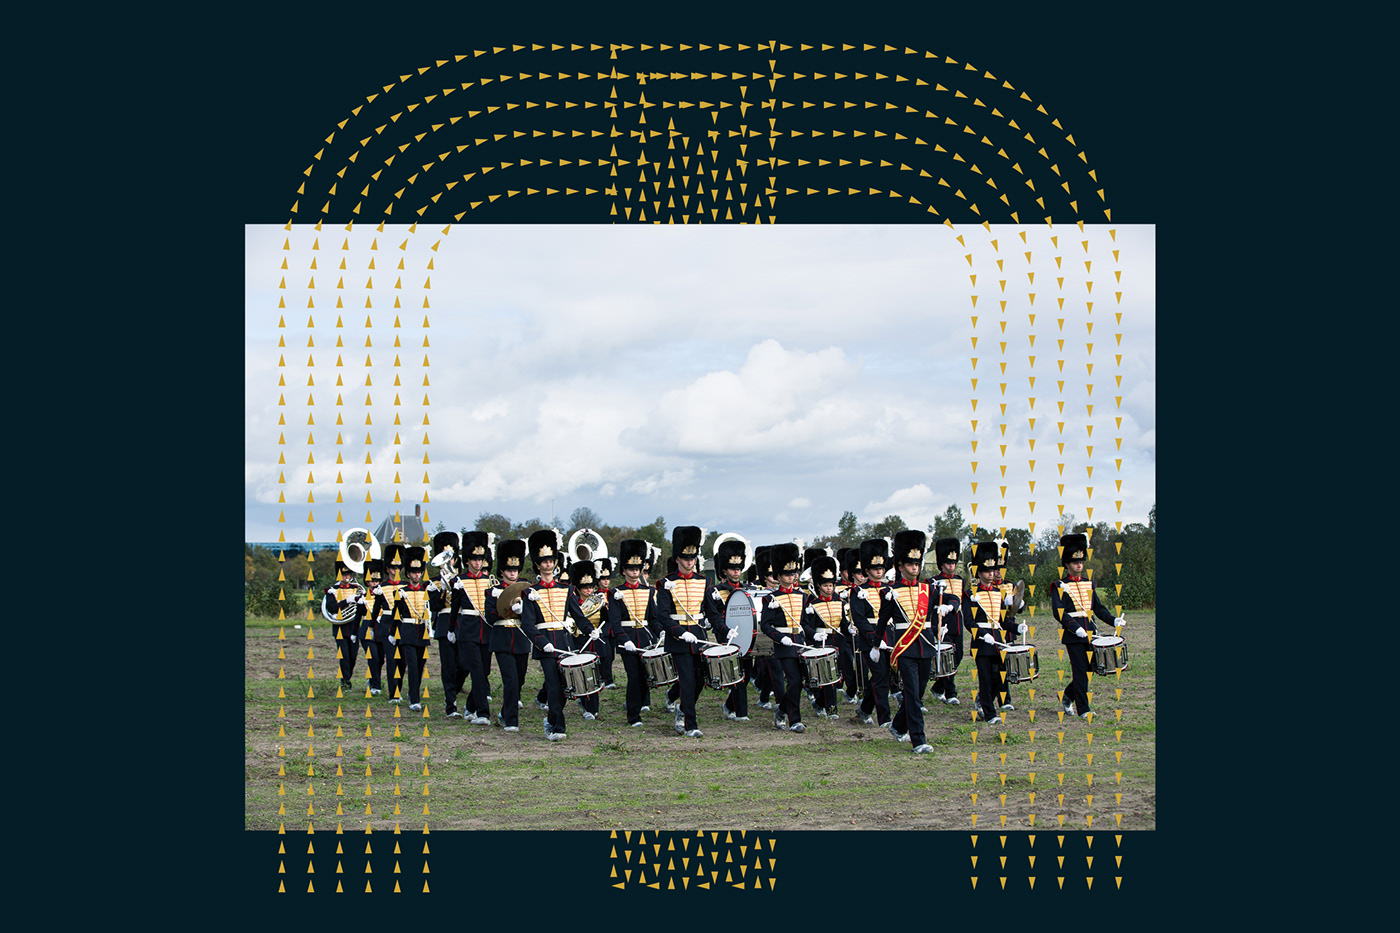 orchestra music marchingband type Collaboration rubenst dutch drone geometric lines